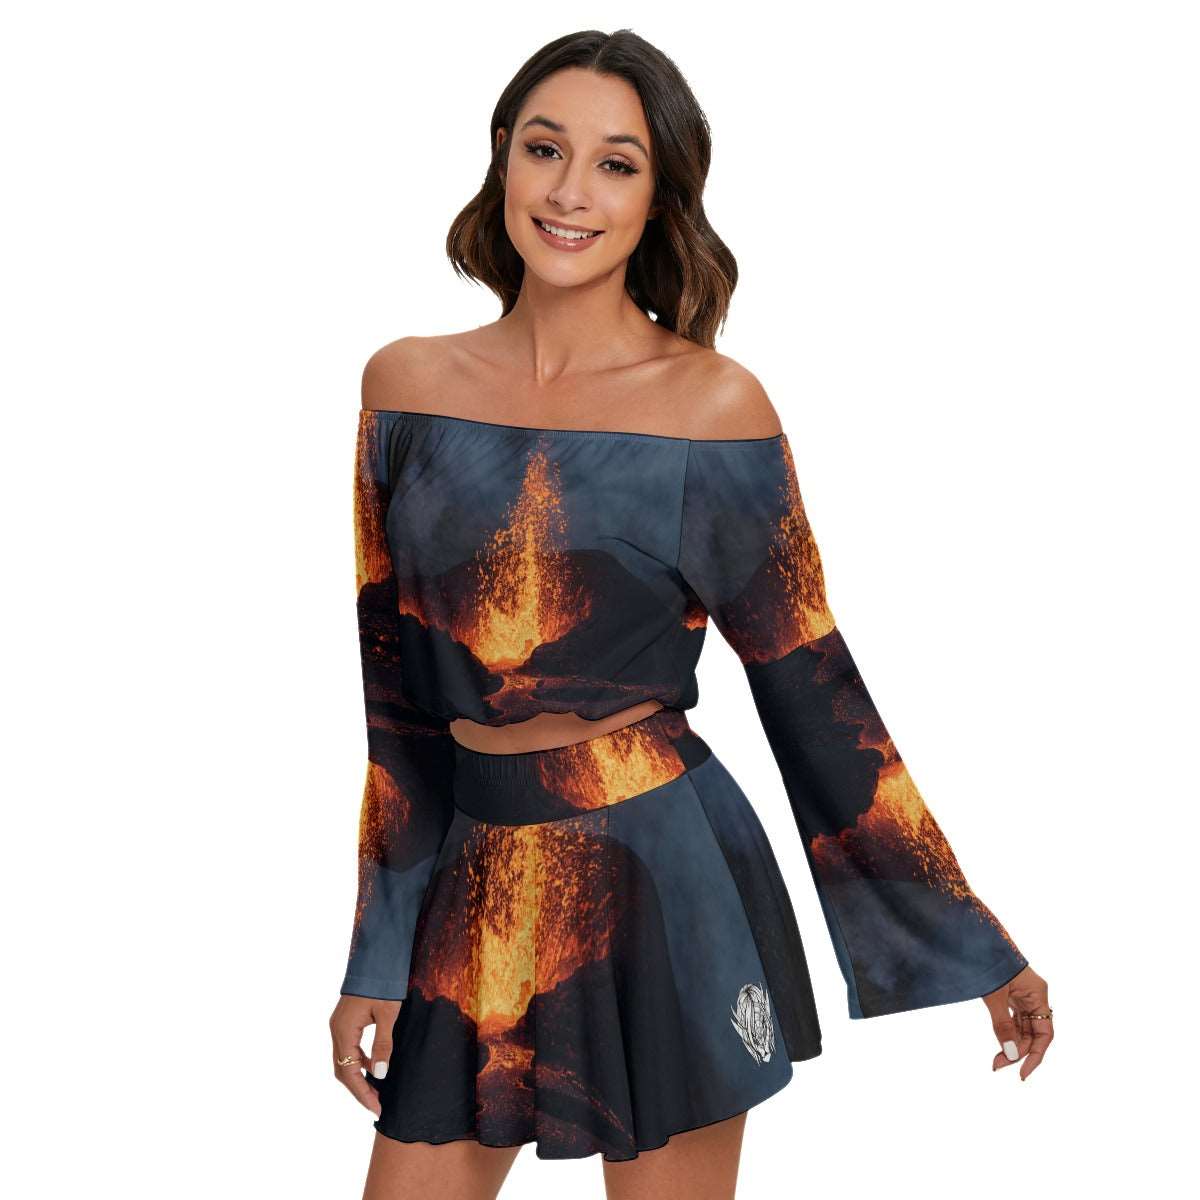 FIred up Ice Queen Women's Off-shoulder Top And Skirt Set